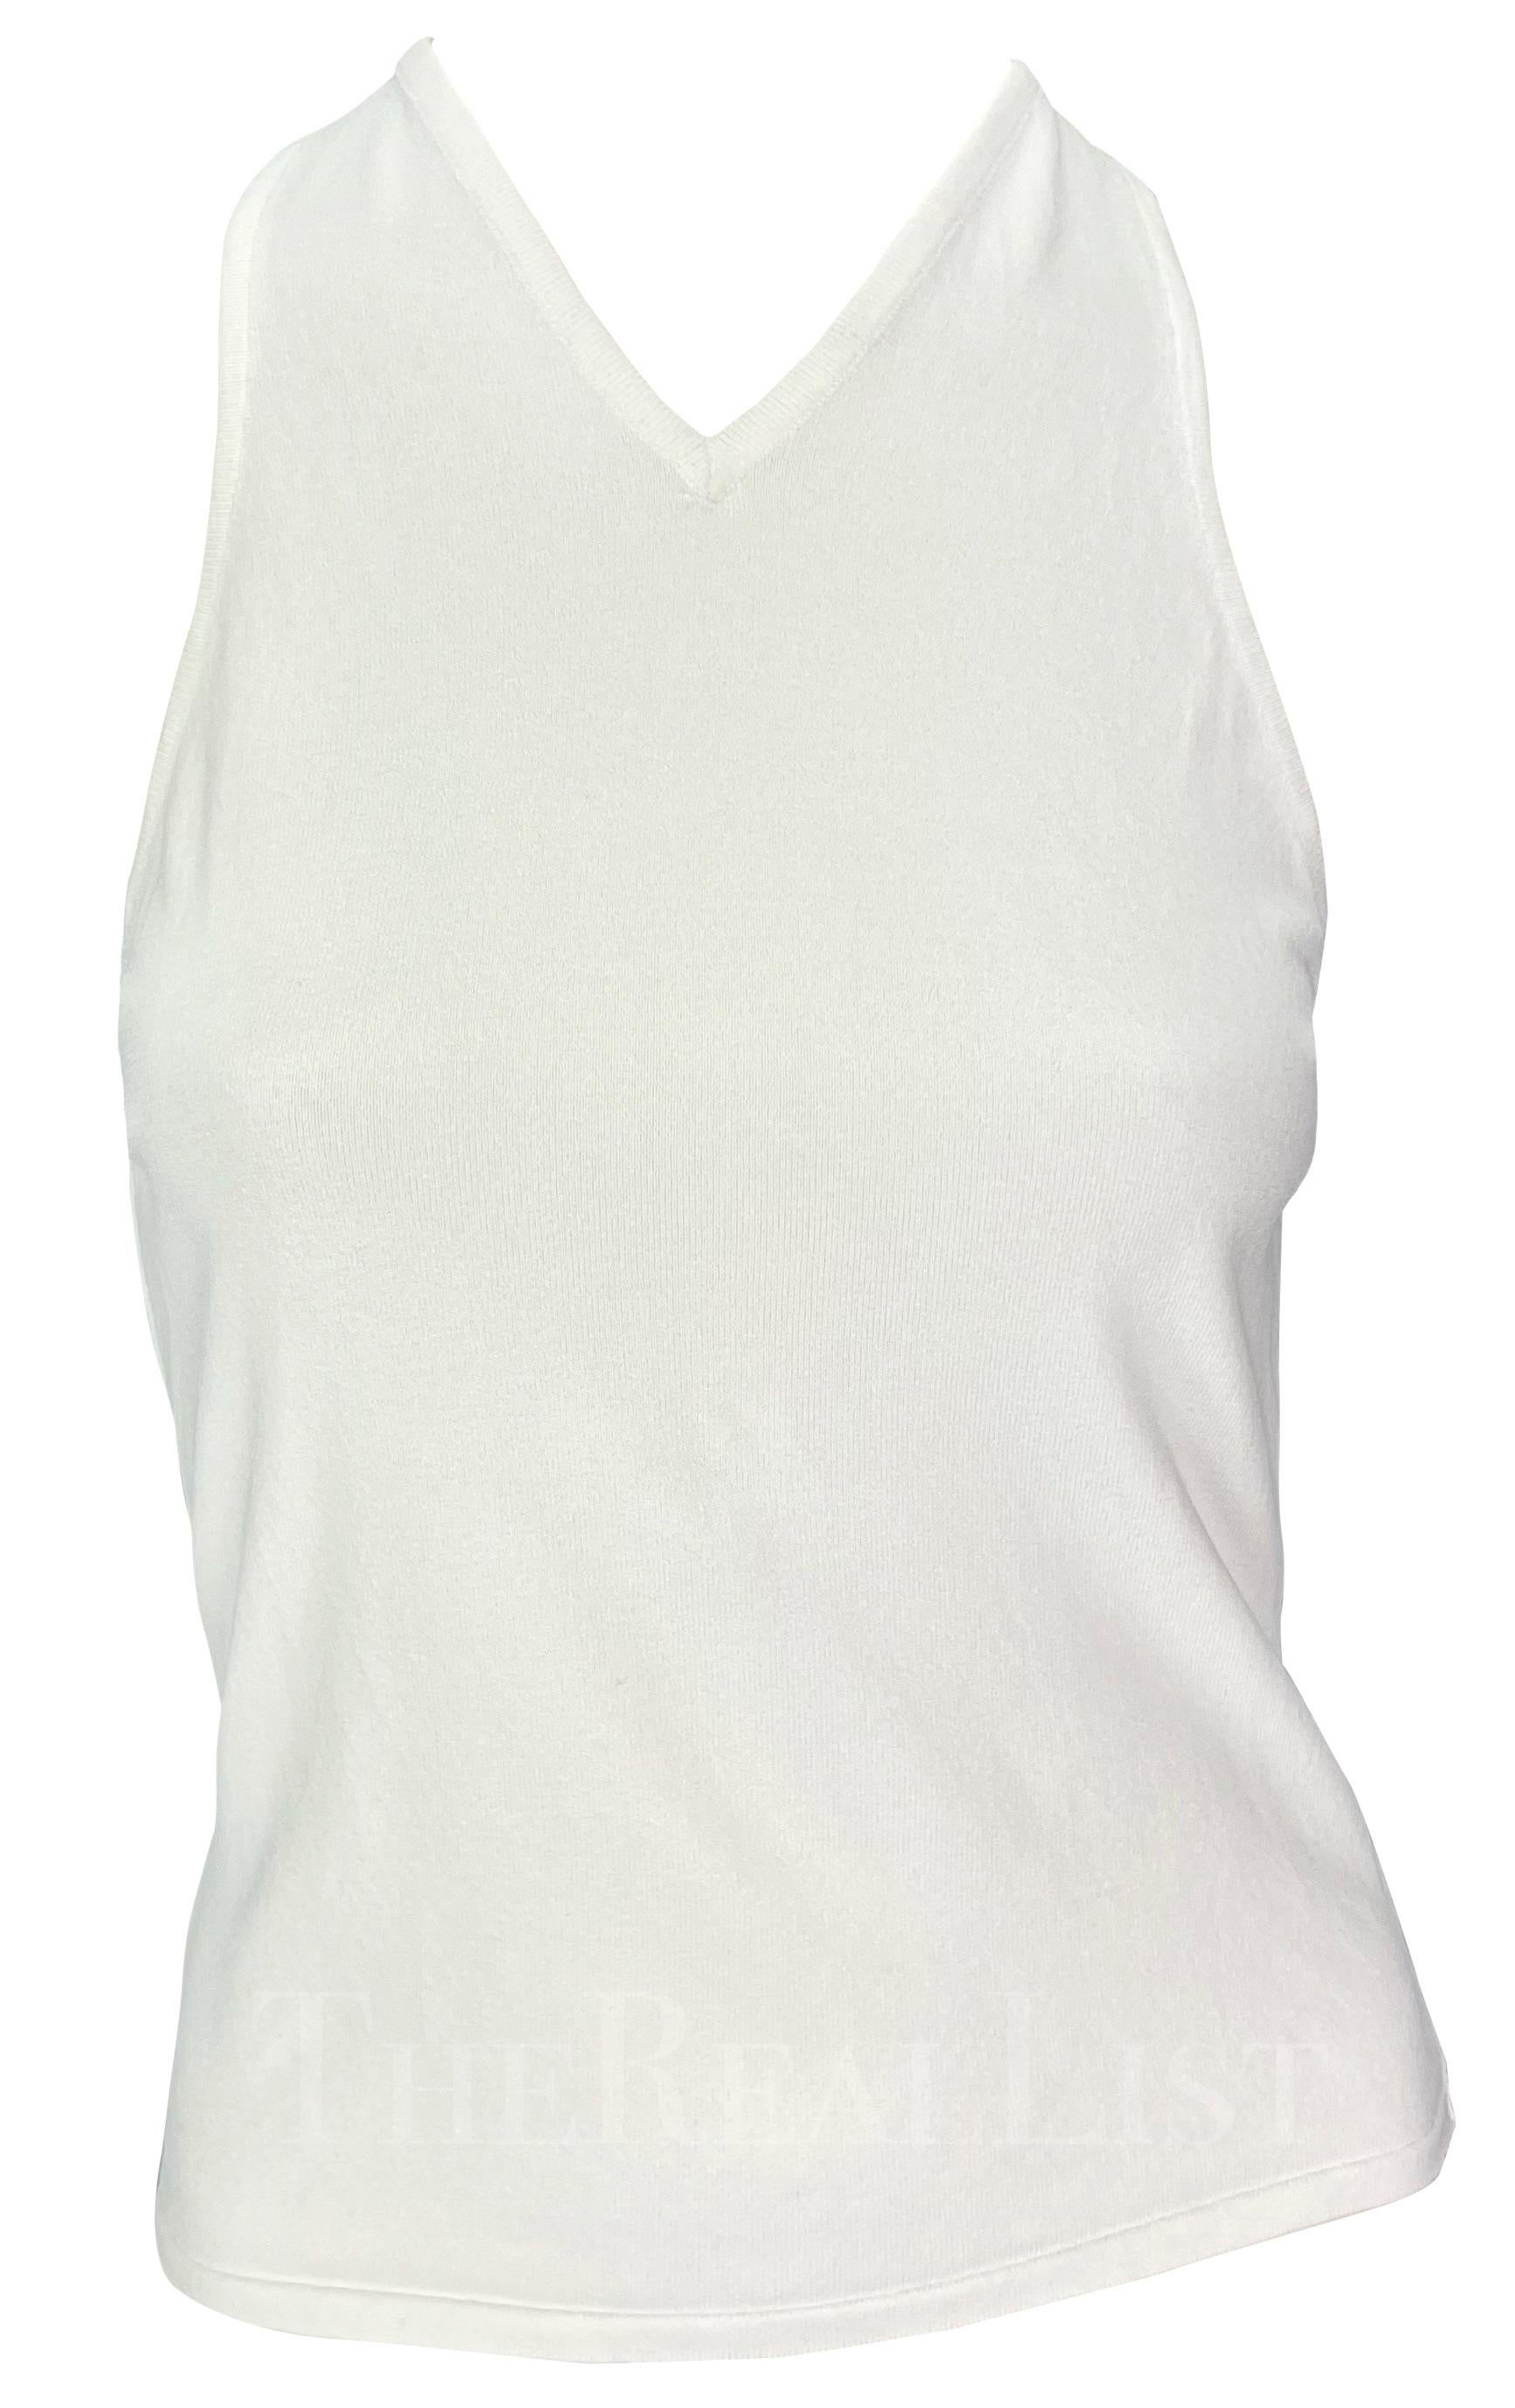 S/S 1998 Gucci by Tom Ford White Stretch Knit Racerback Tank Top en vente 1